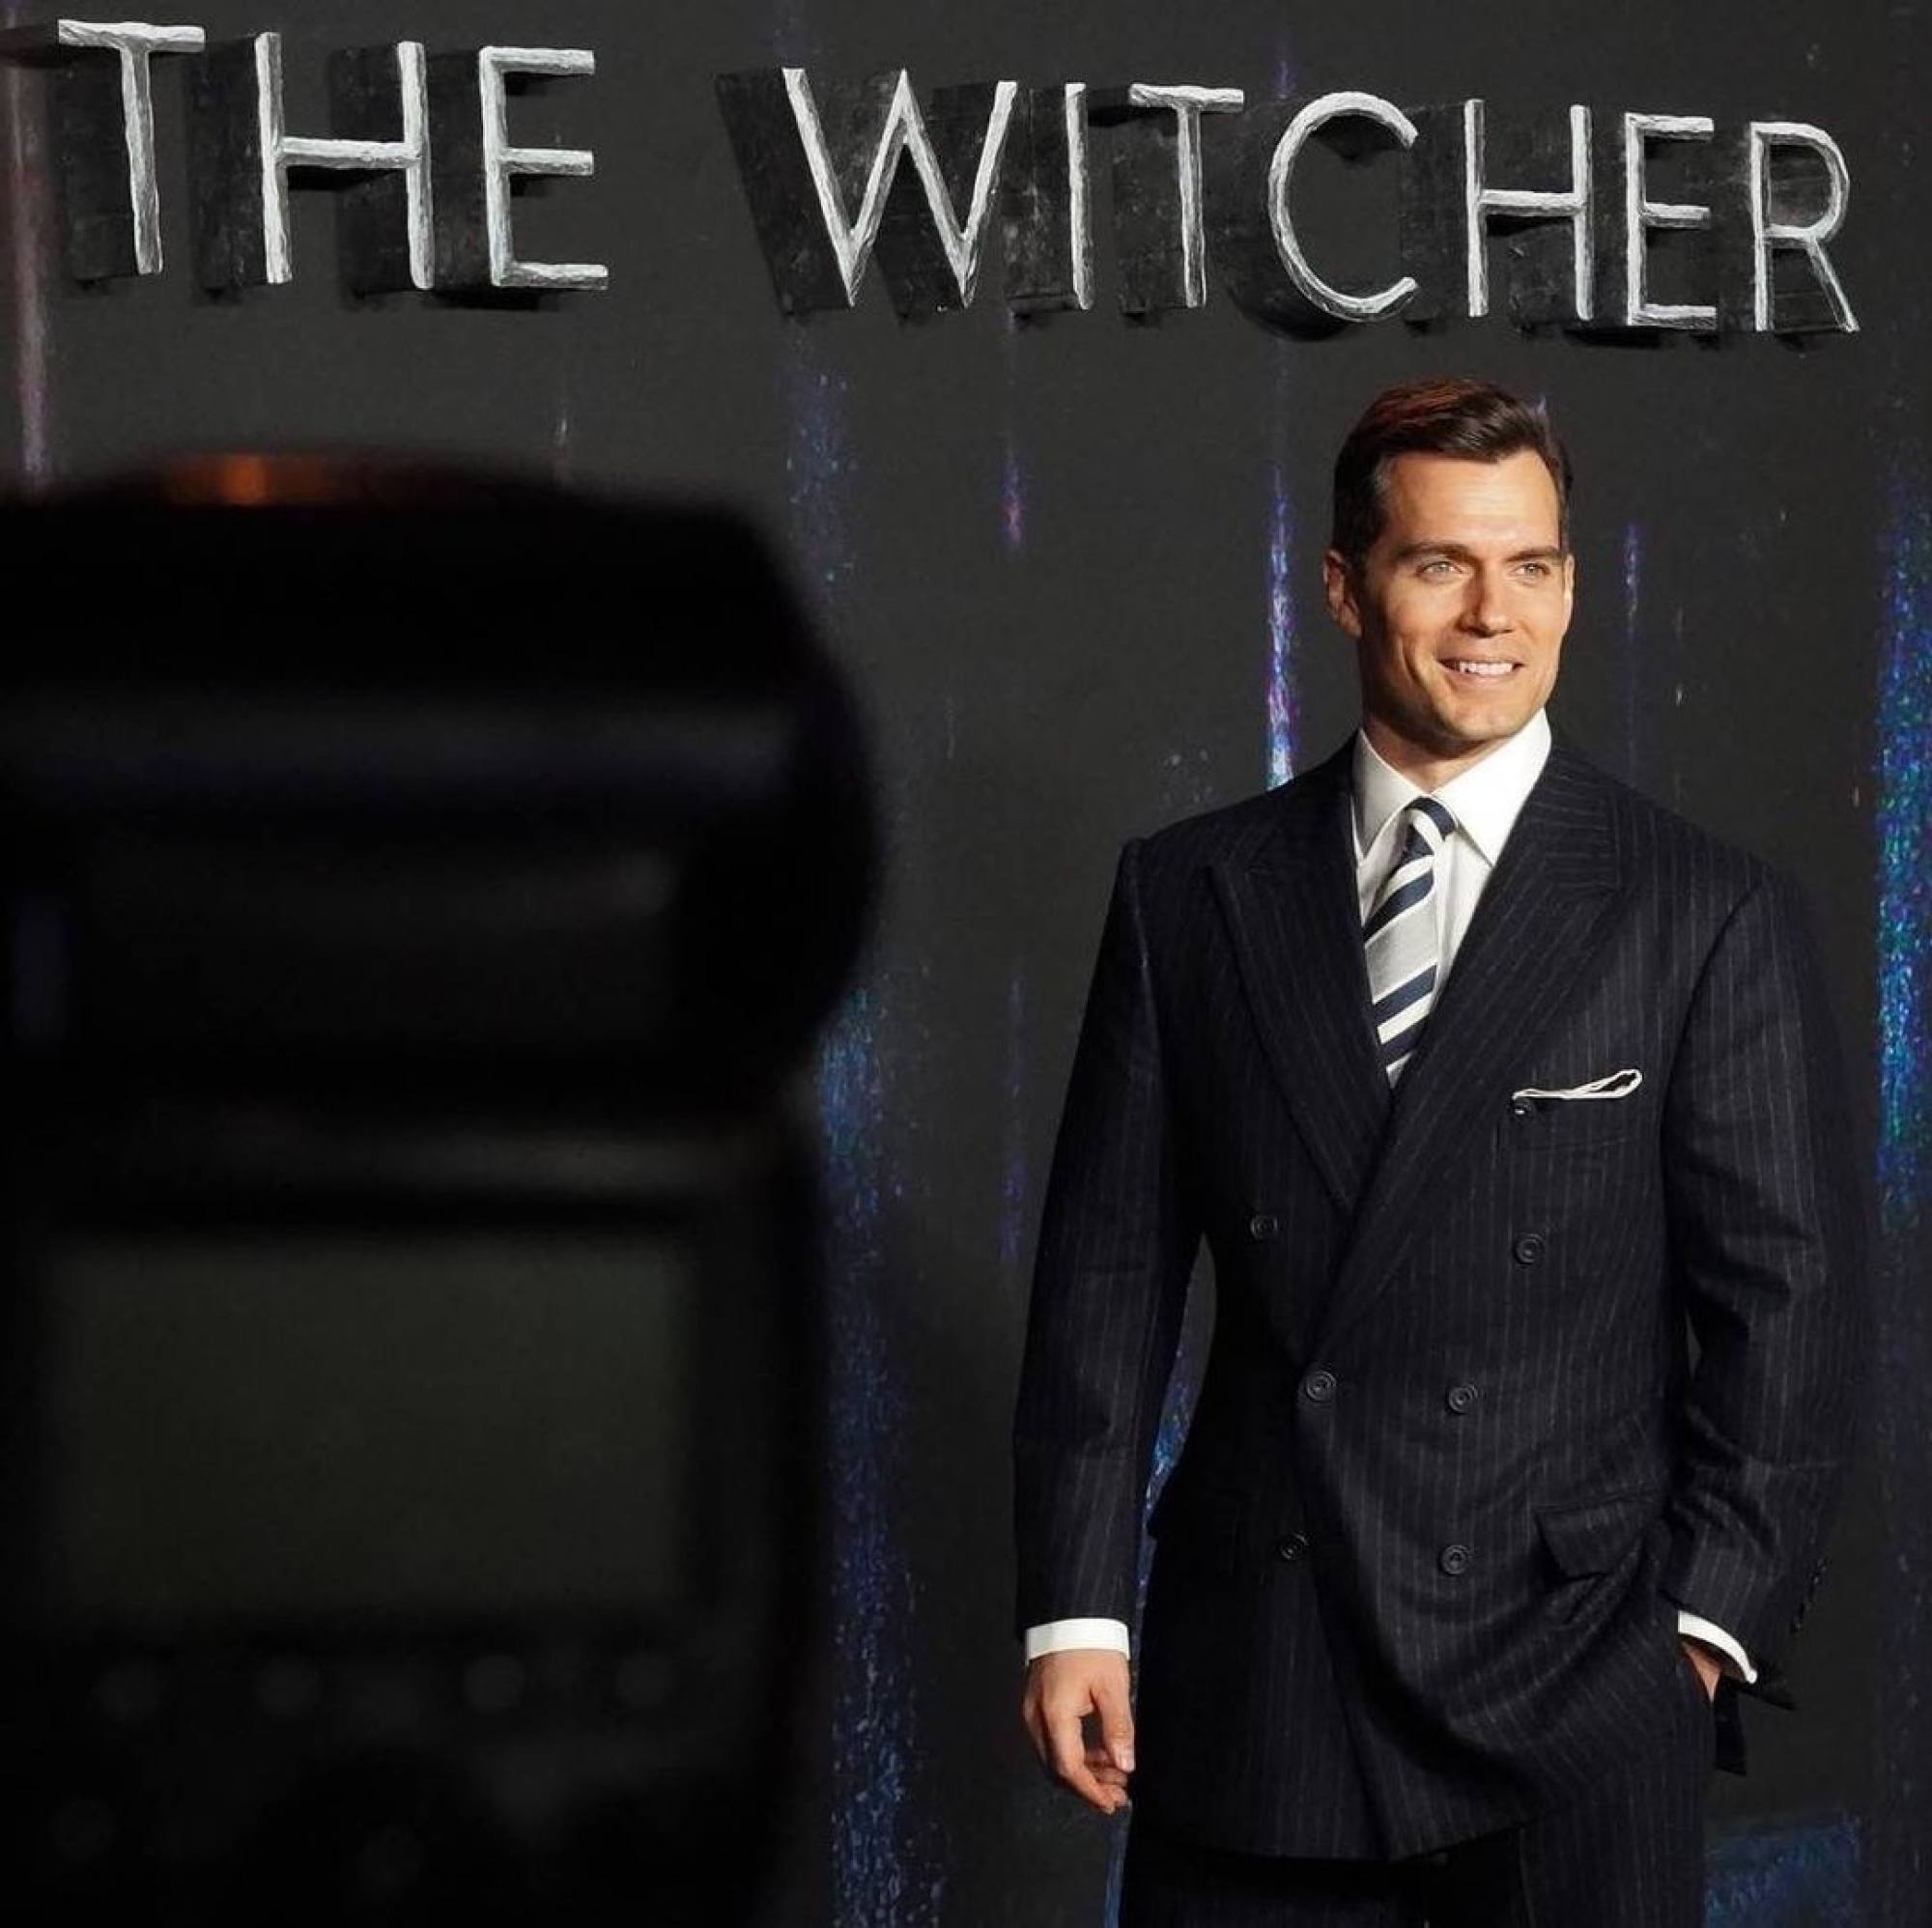 The Witcher season 3, Henry Cavill's last outing, will arrive this summer